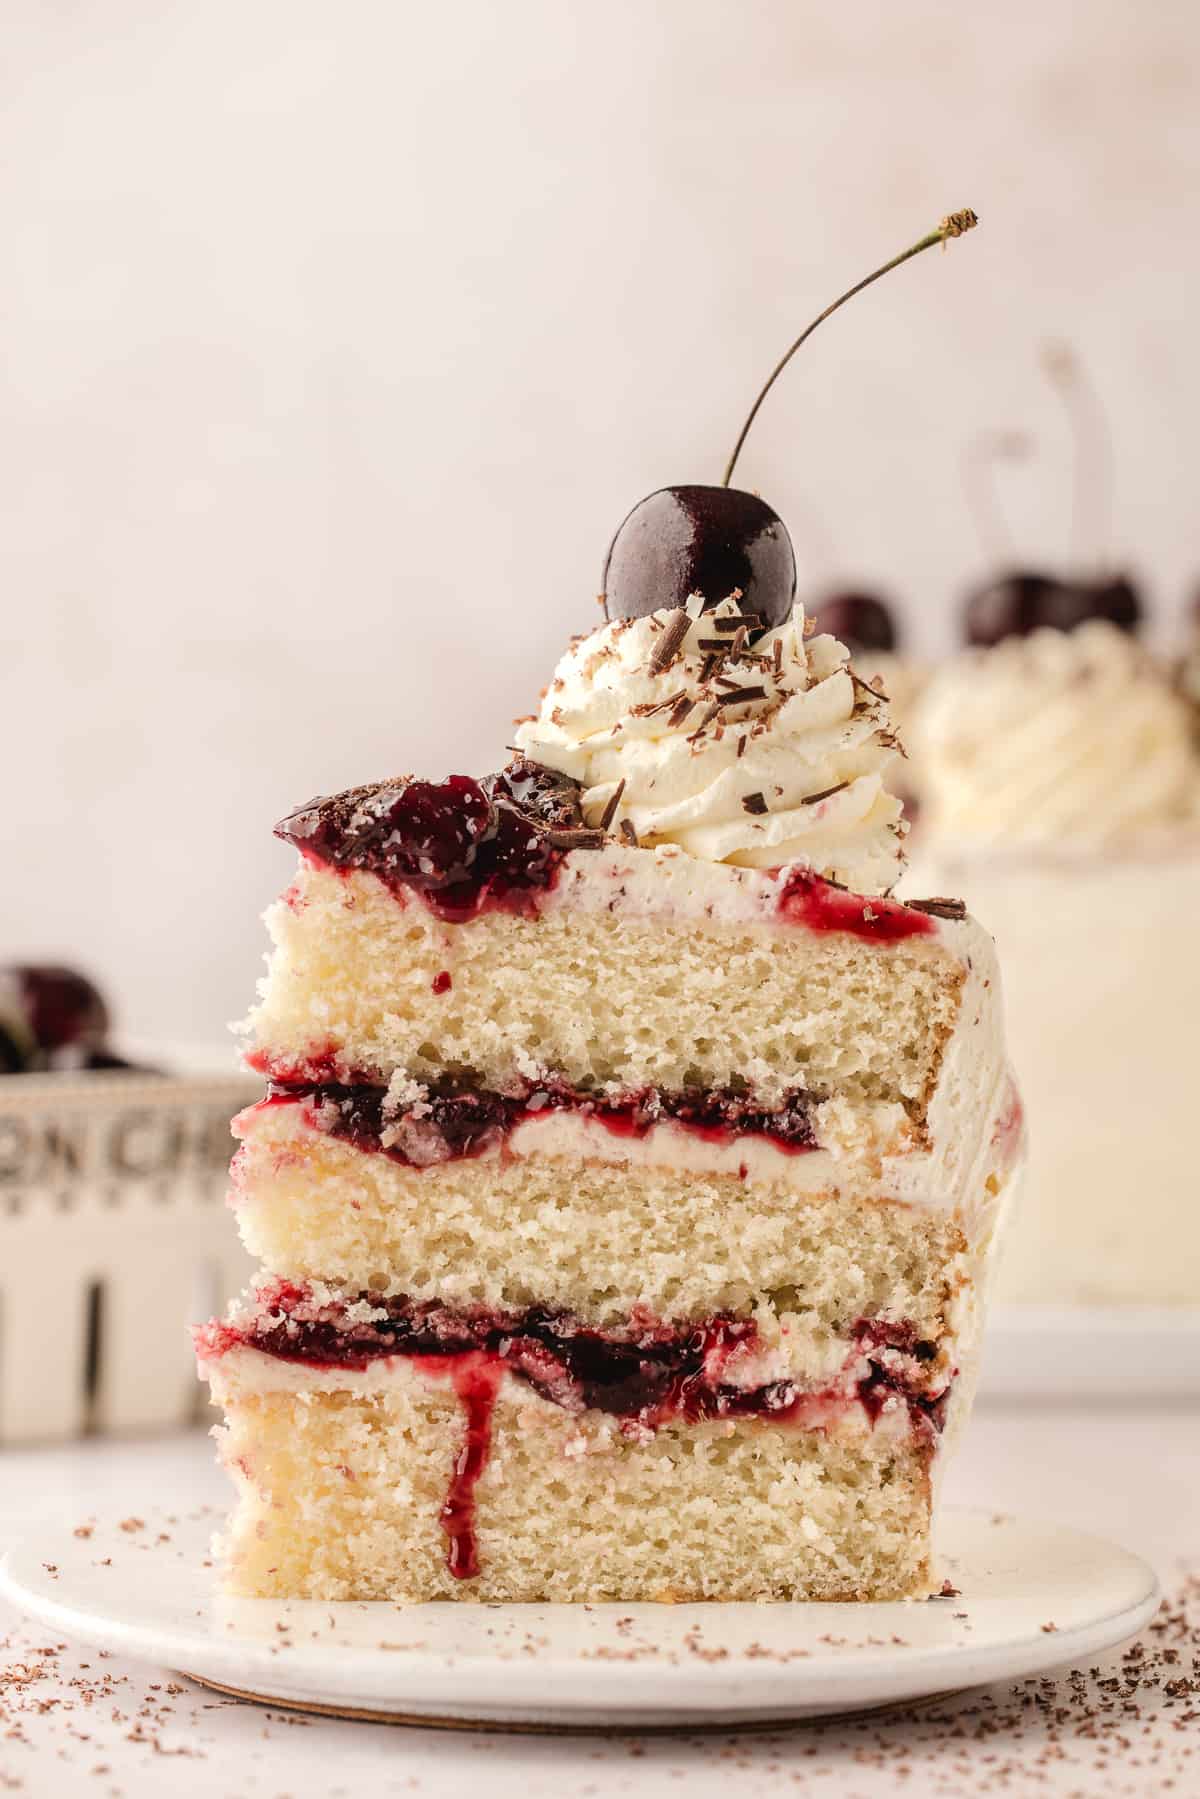 A single slice of white forest cake topped with fresh cherries on a white plate with the remaining cake in the background.